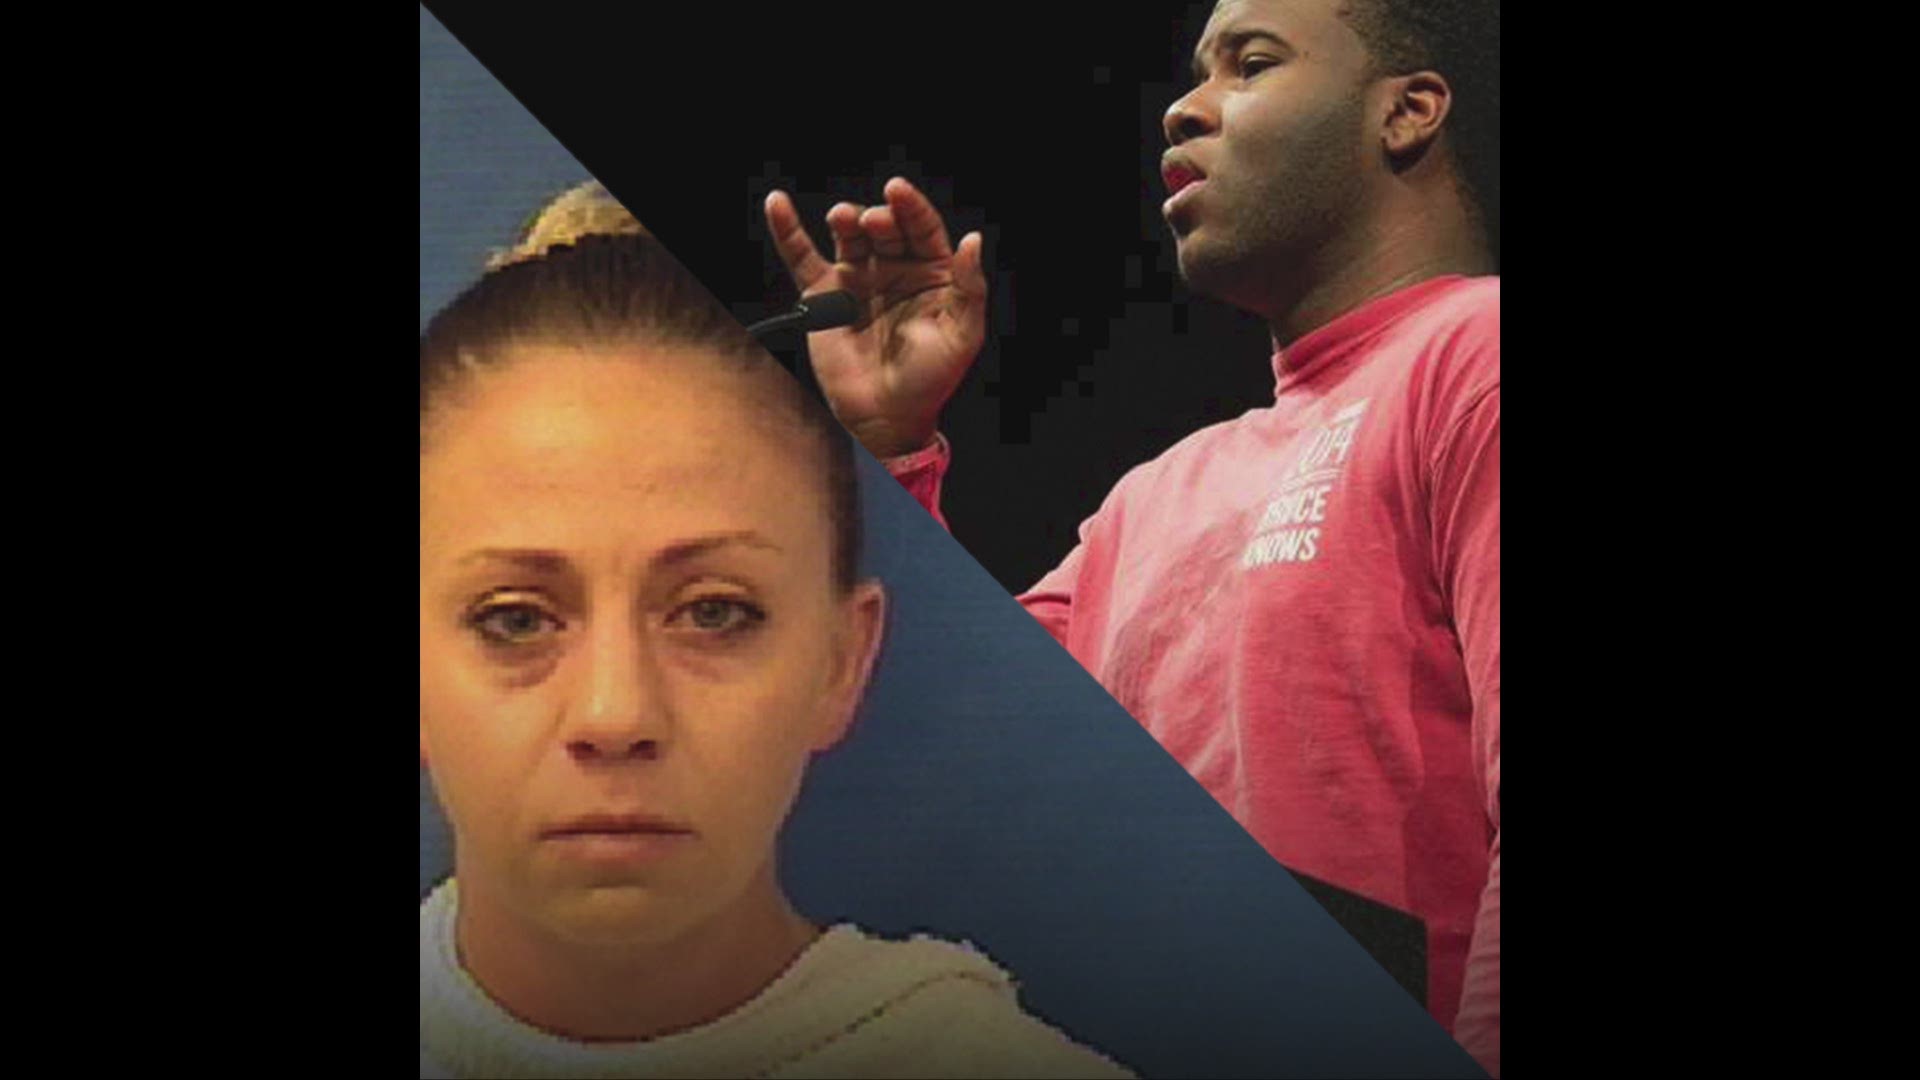 A breakdown of what transpired in the nearly 72 hours between the shooting of Botham Shem Jean and the arrest of Amber Guyger.